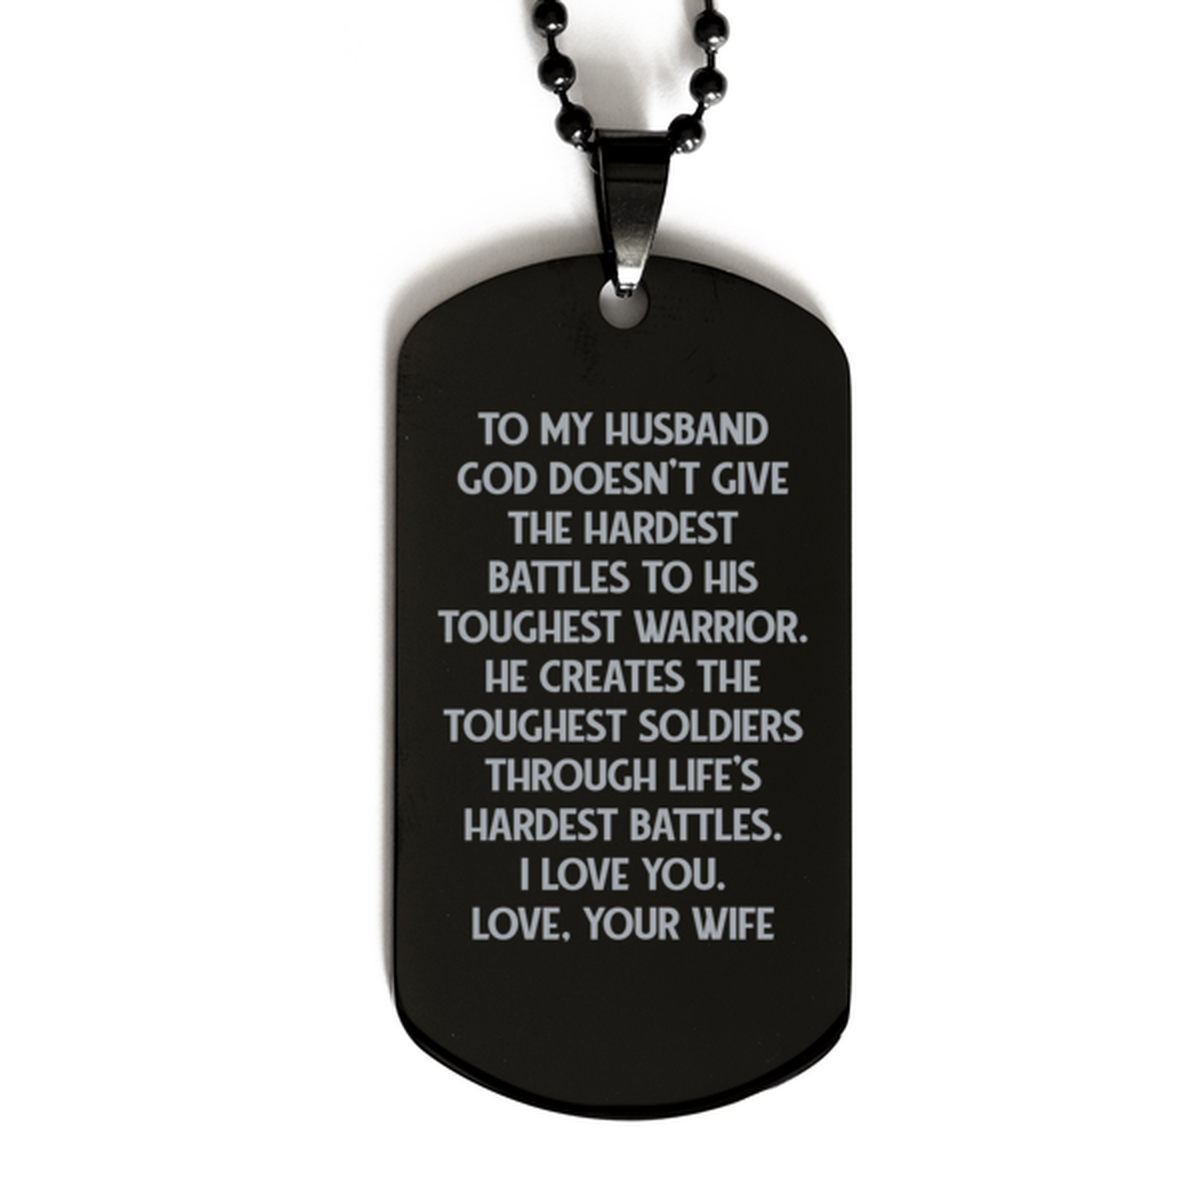 To My Husband Black Dog Tag, God Creates The Toughest Soldiers, Anniversary Gifts For Husband From Wife, Birthday Gifts For Men